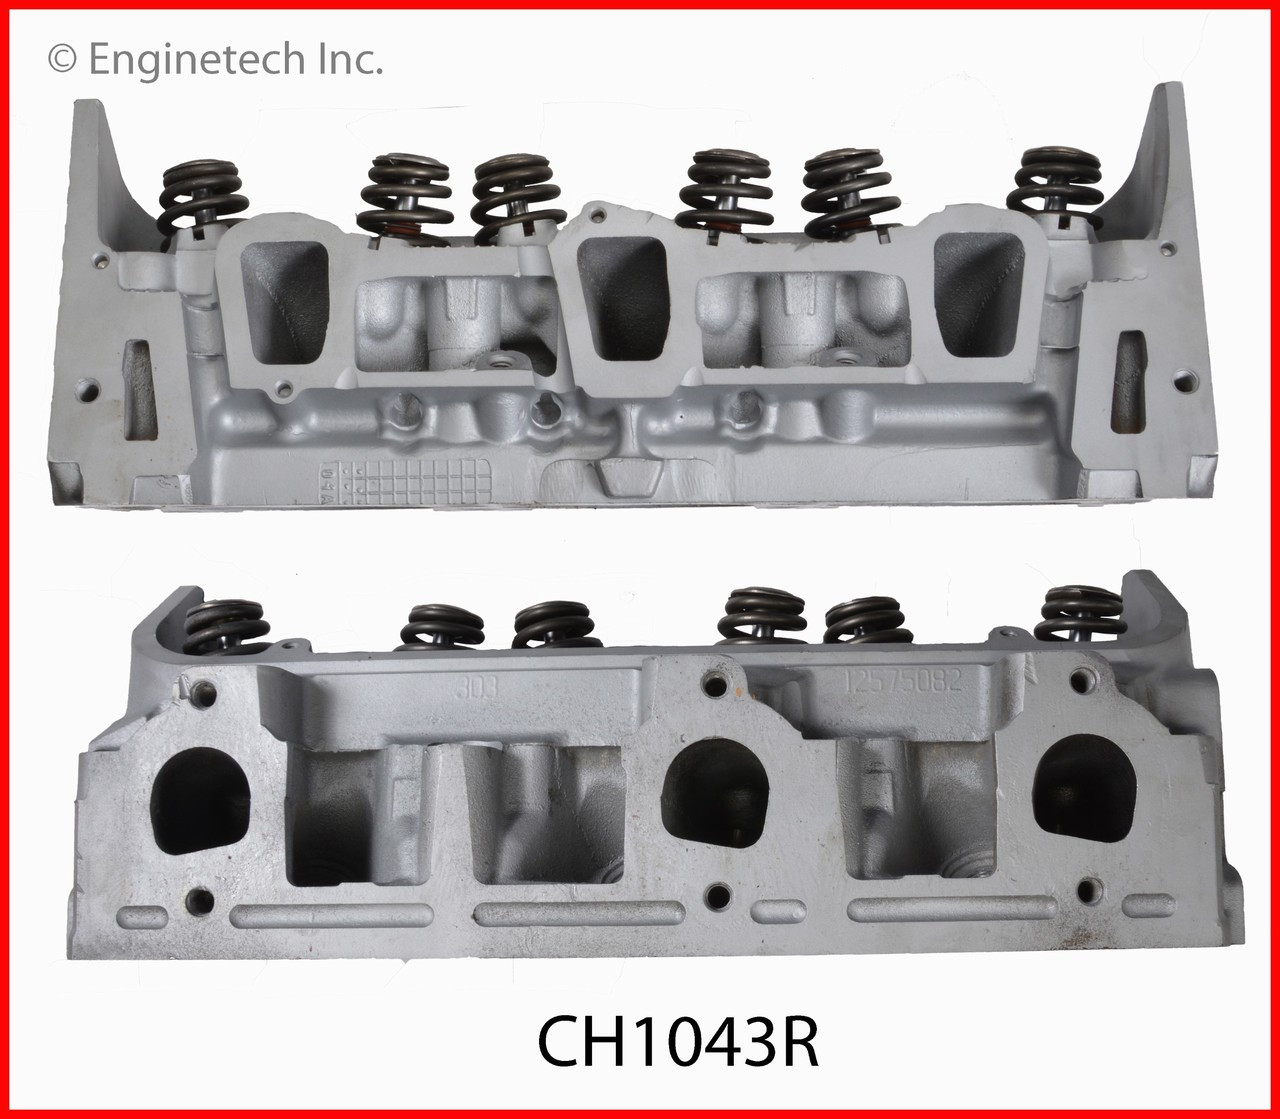 2005 Chevrolet Venture 3.4L Engine Cylinder Head Assembly CH1043R -3